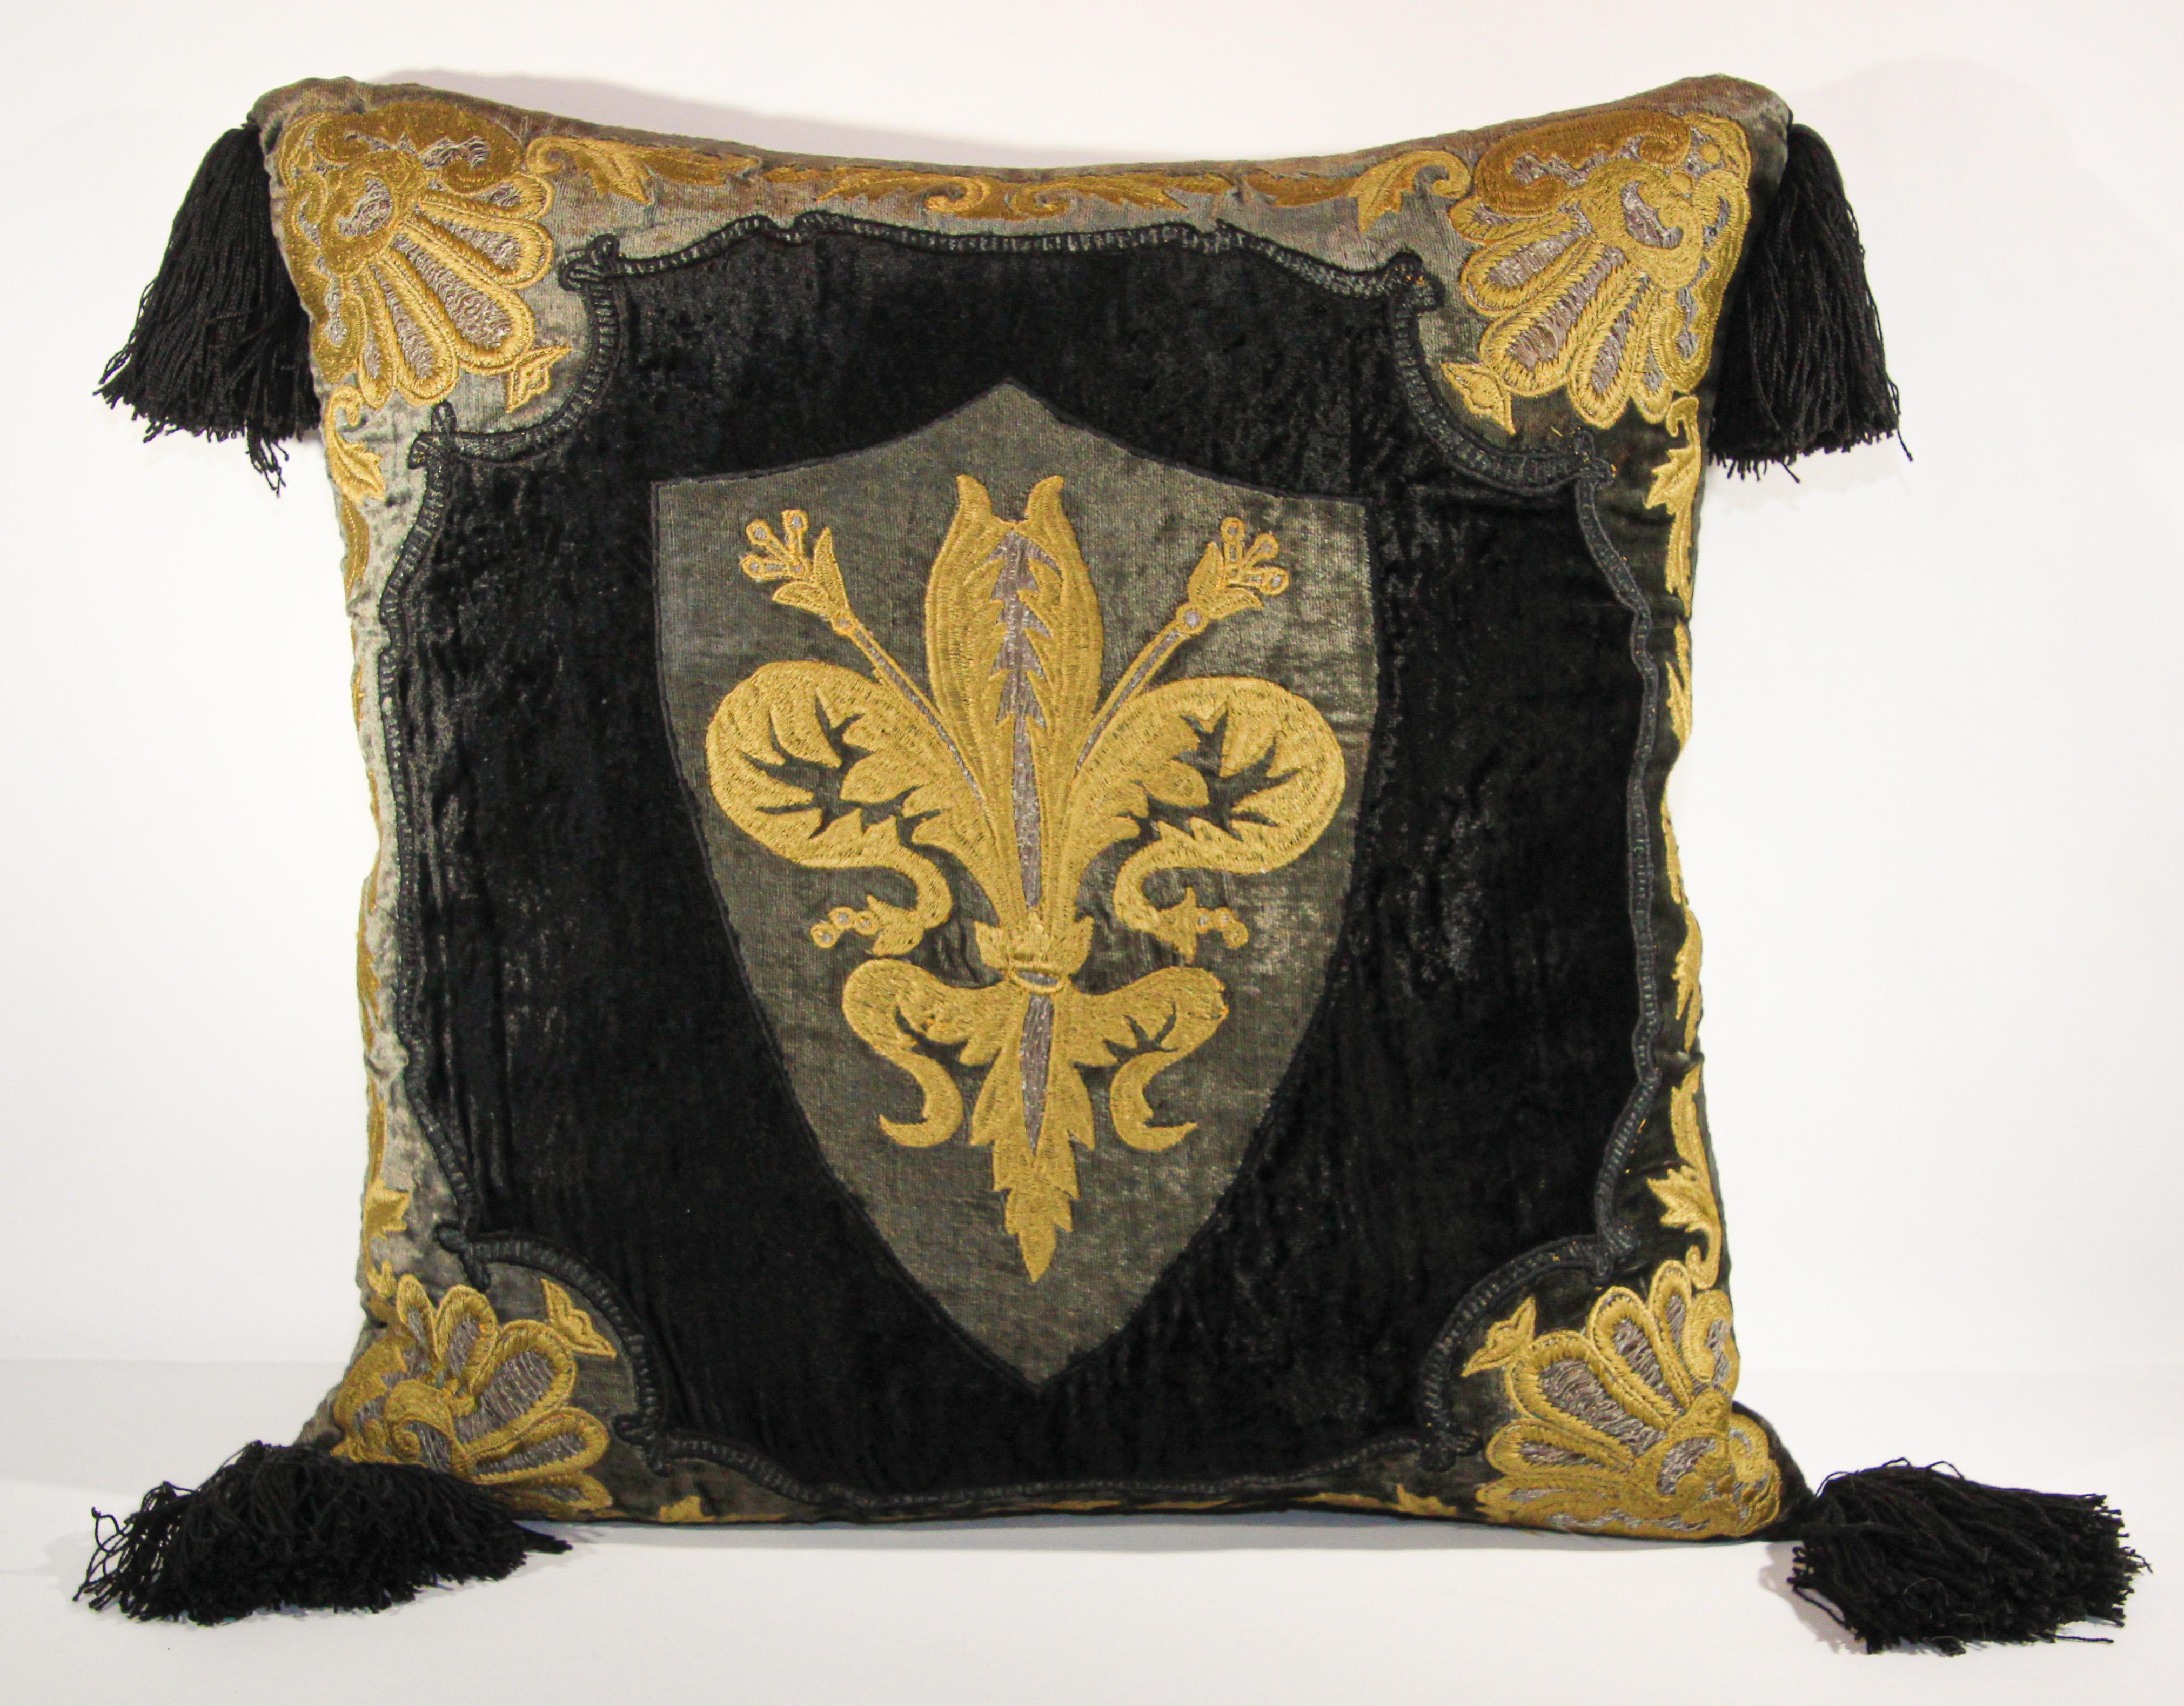 Vintage Baroque silk decorative accent pillow with black tassels.
Crushed black silk velvet applique embroidered accented with large black tassels on each corner.
Baroque decor gold and grey applique in front of the pillow.
Size: 17